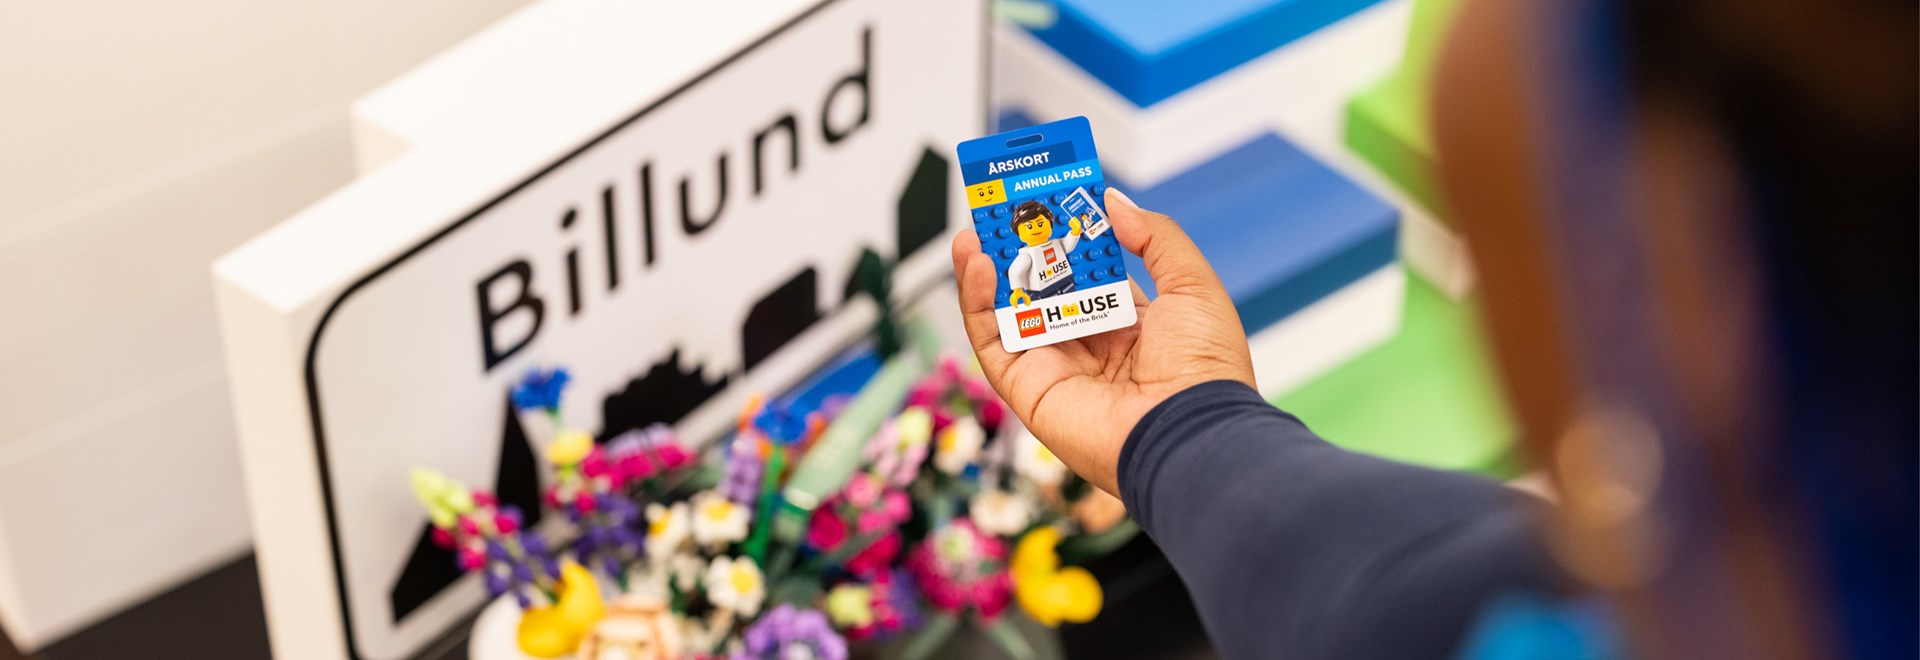 Buy an annual pass for LEGO House in March and save 150 DKK. Then you can visit all year around.